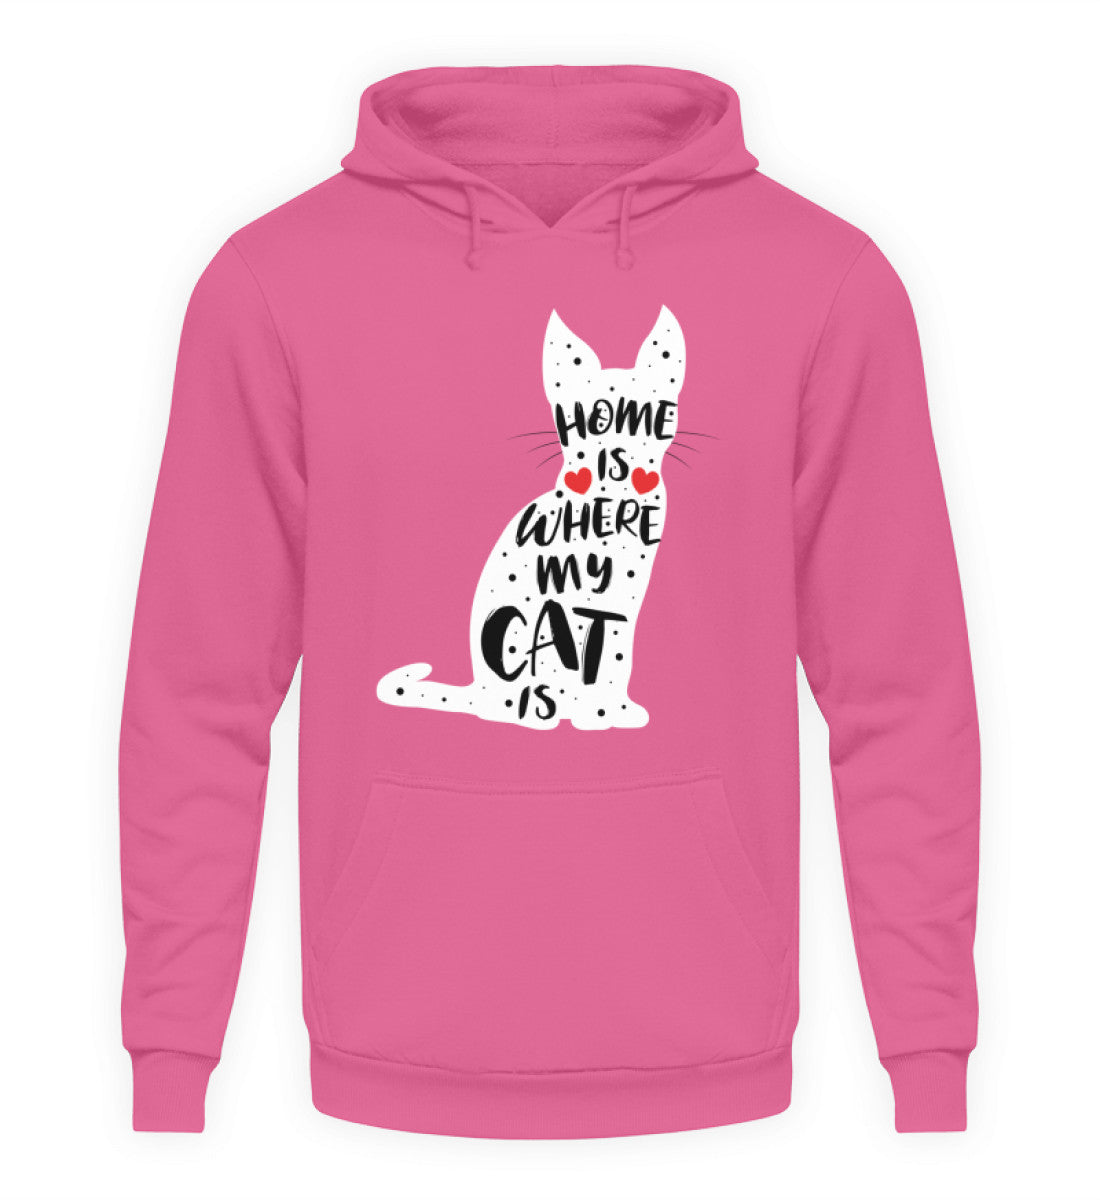 Zeigt home is where my cat is unisex kapuzenpullover hoodie in Farbe Jet Black